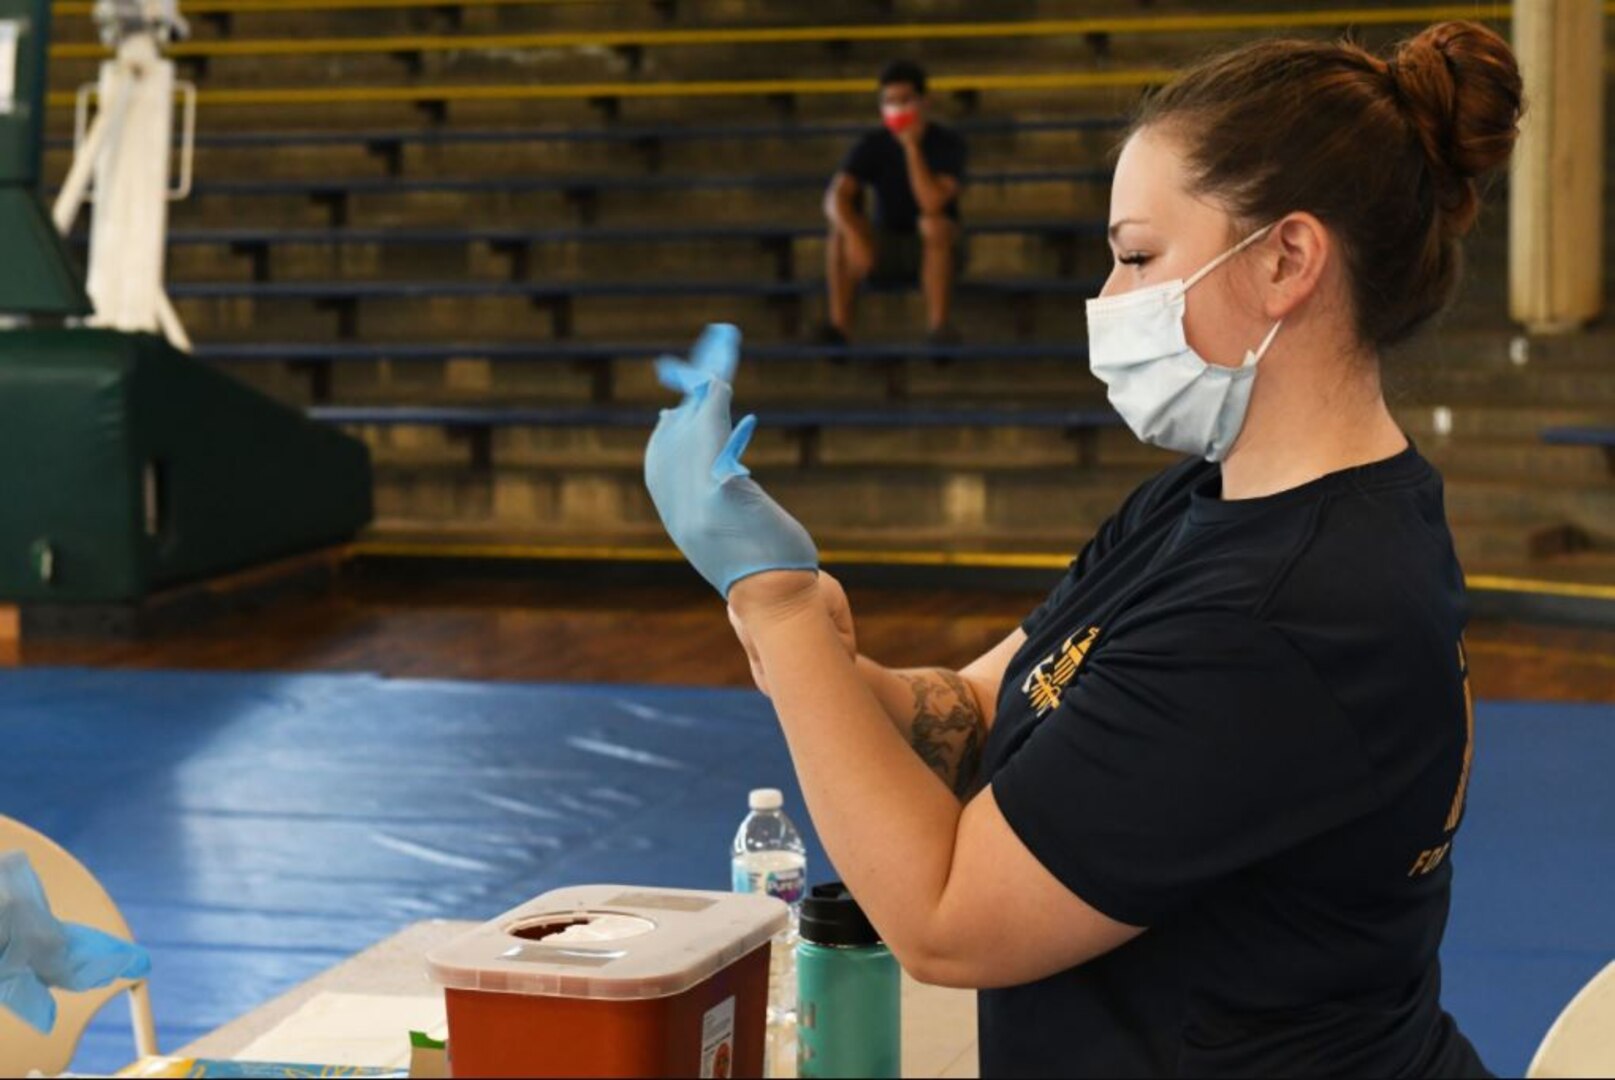 Navy Medicine Readiness and Training Command (NMRTC) Pearl Harbor is gearing up for Hawaii’s flu season, typically stretching from November to May.